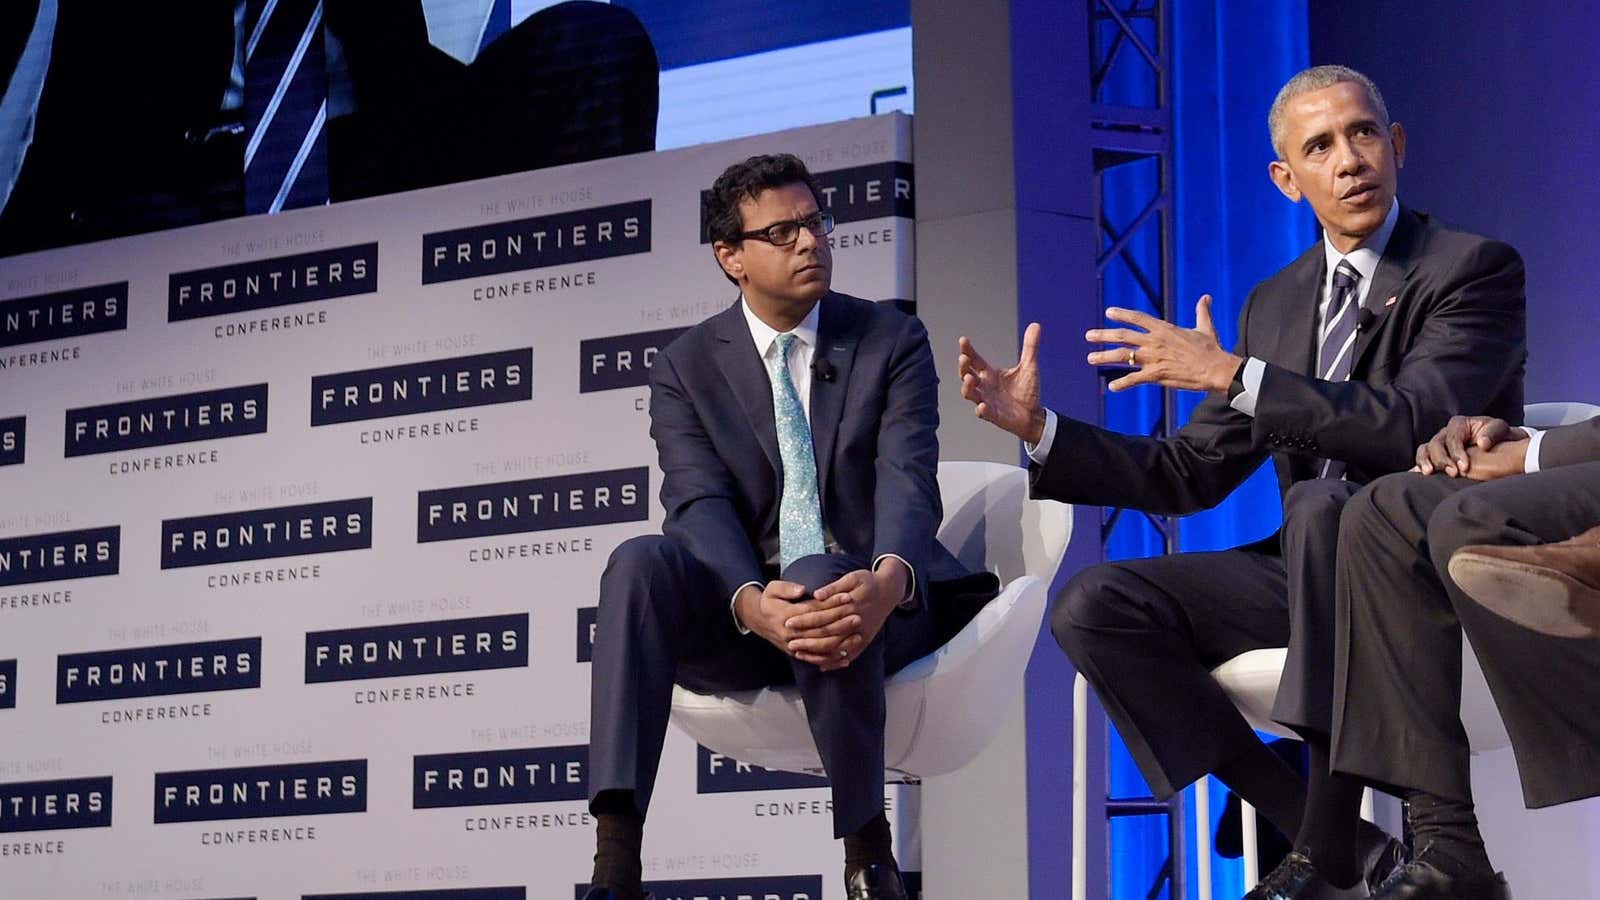 Atul Gawande (left) was hired as CEO for the new venture.